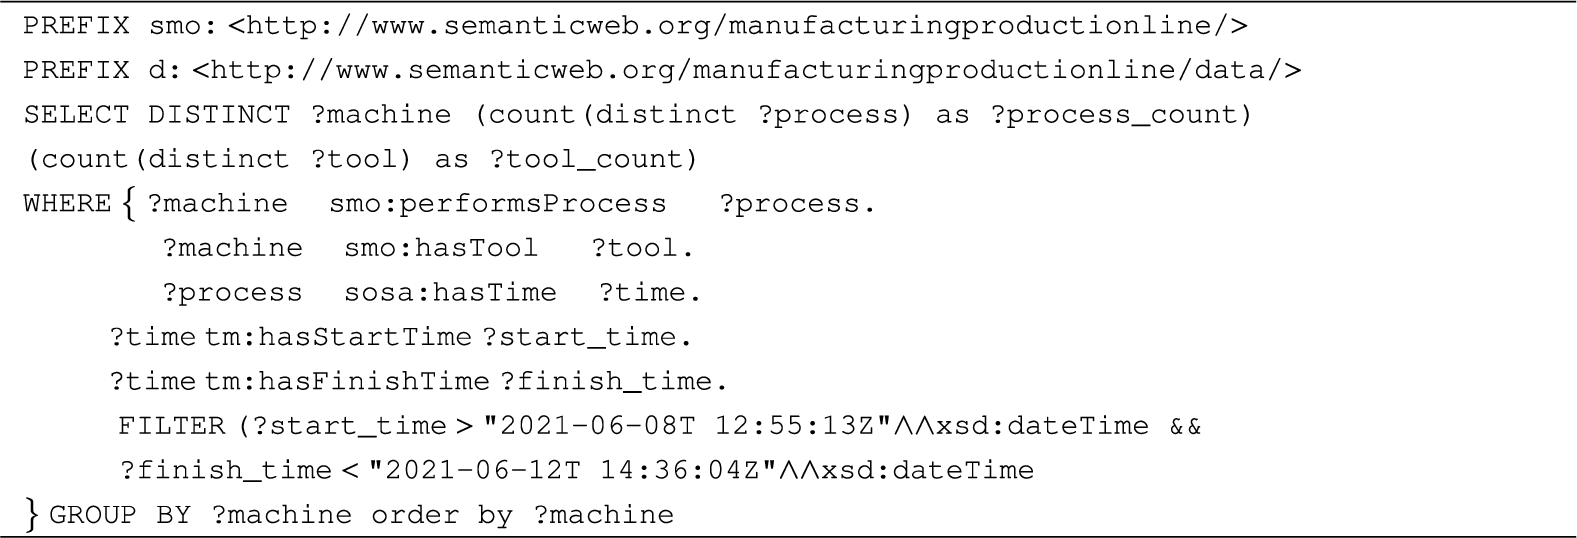 Query to retrieve the count of processes performed by machines and count of tools used by them during a time period